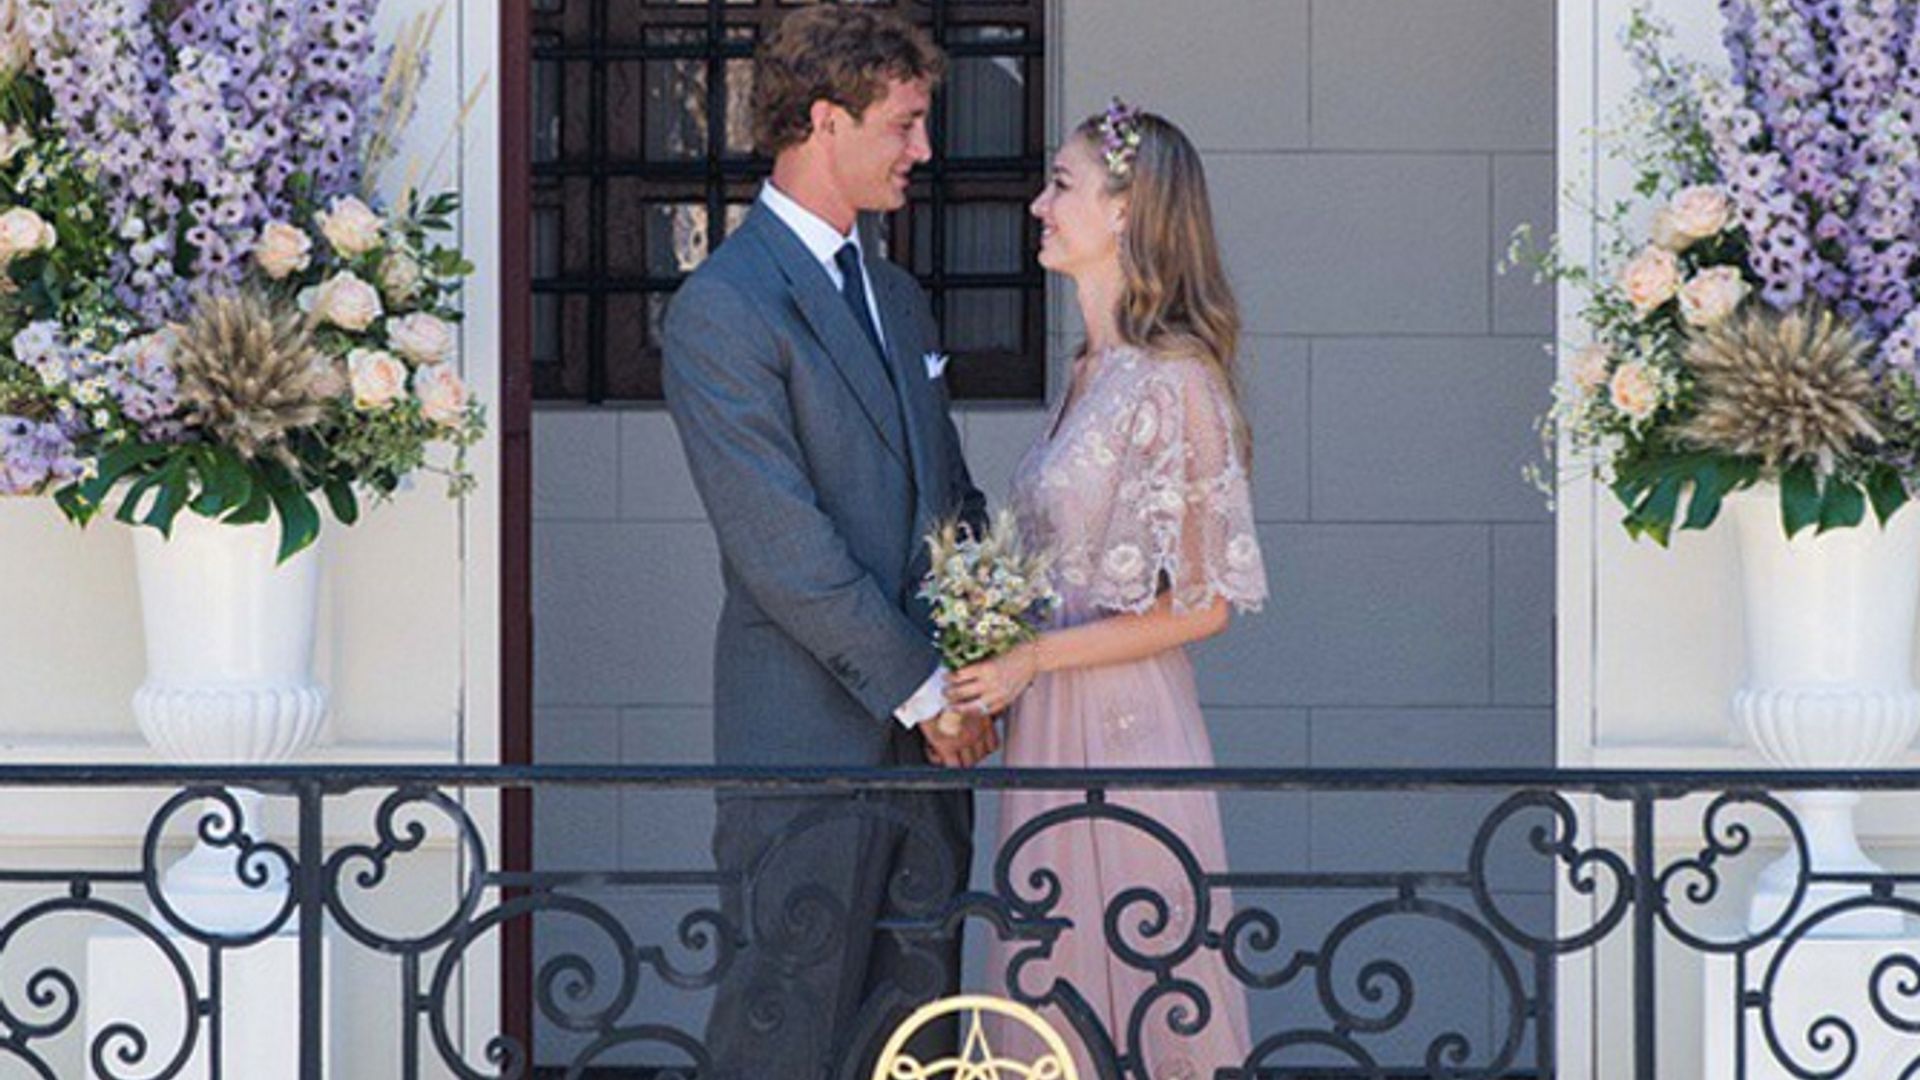 Beatrice Borromeo wears pale pink Valentino gown to marry Pierre Casiraghi